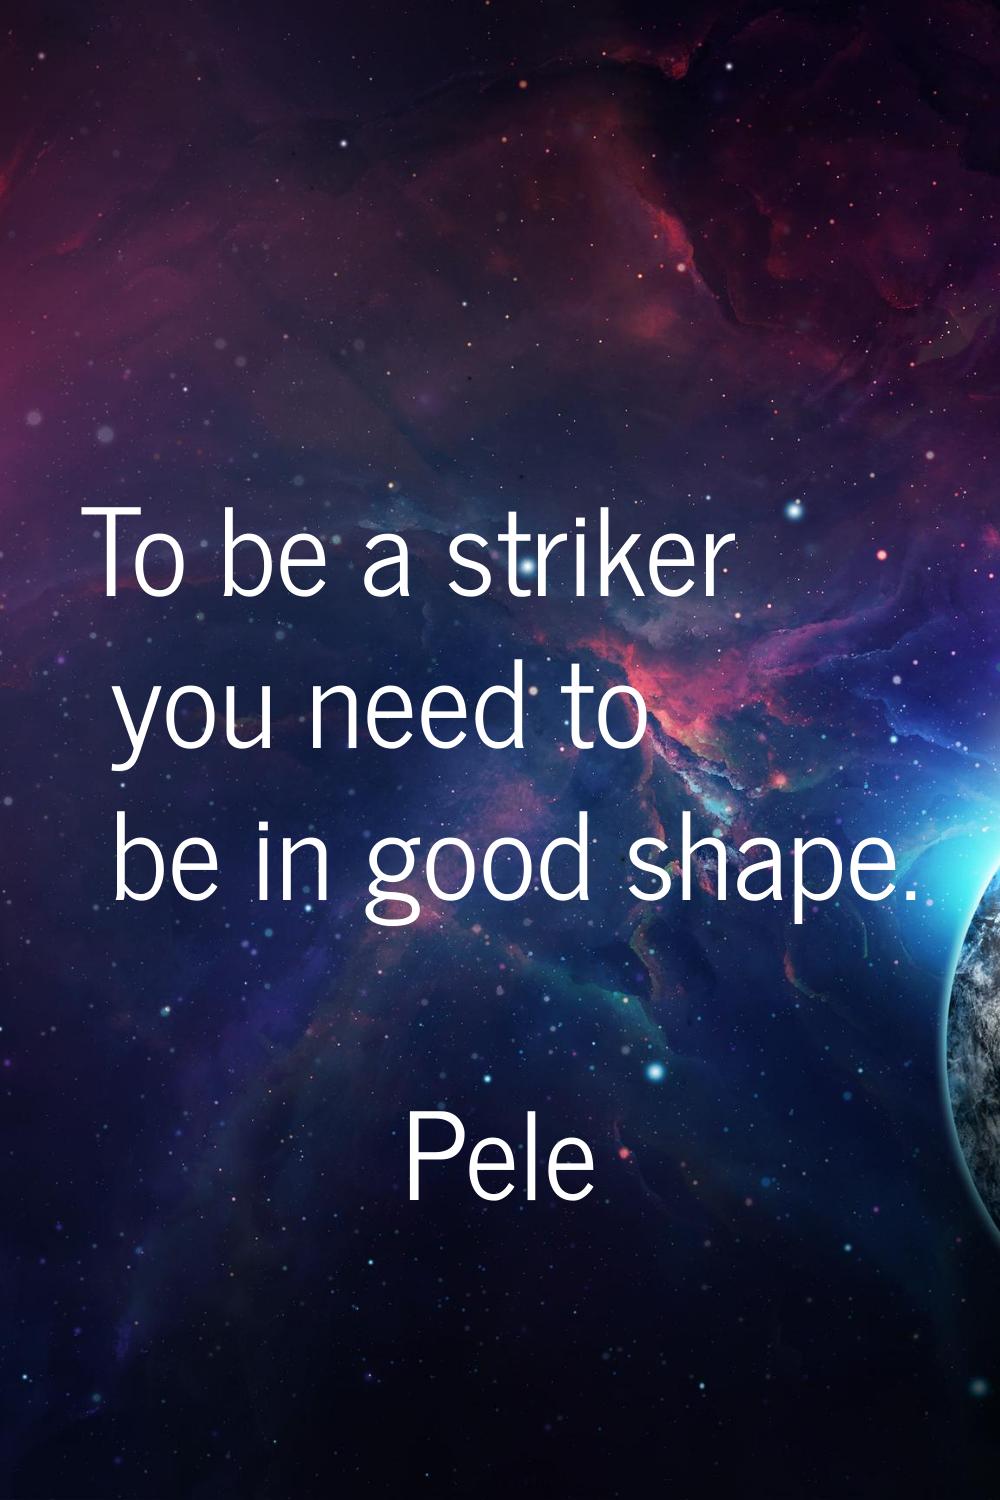 To be a striker you need to be in good shape.